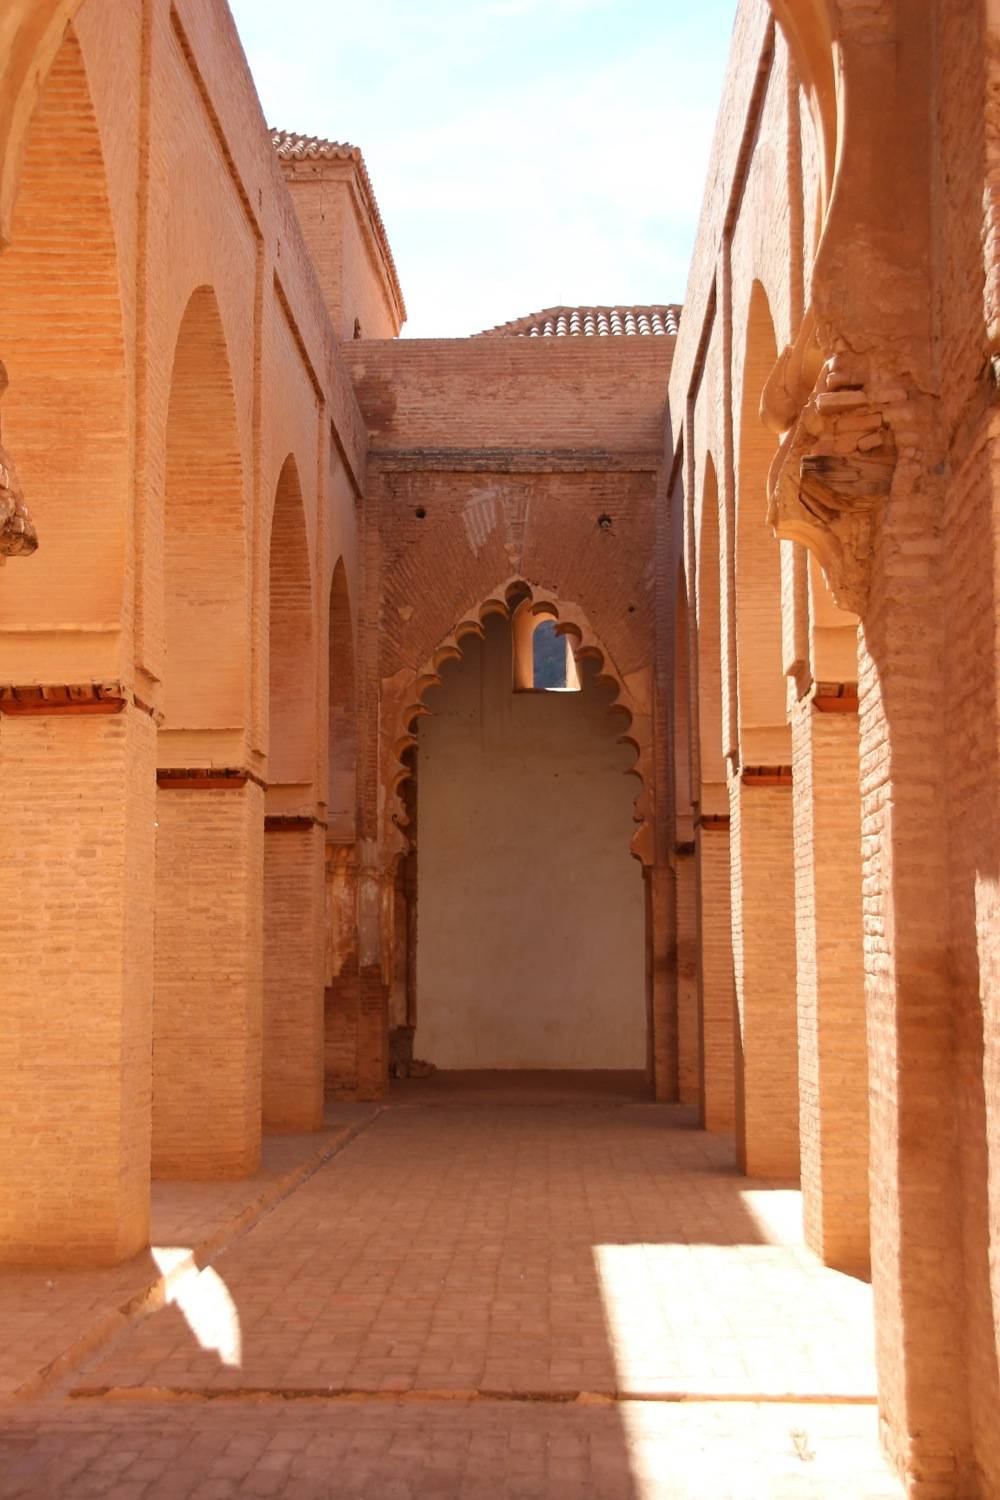 View of courtyard arcade